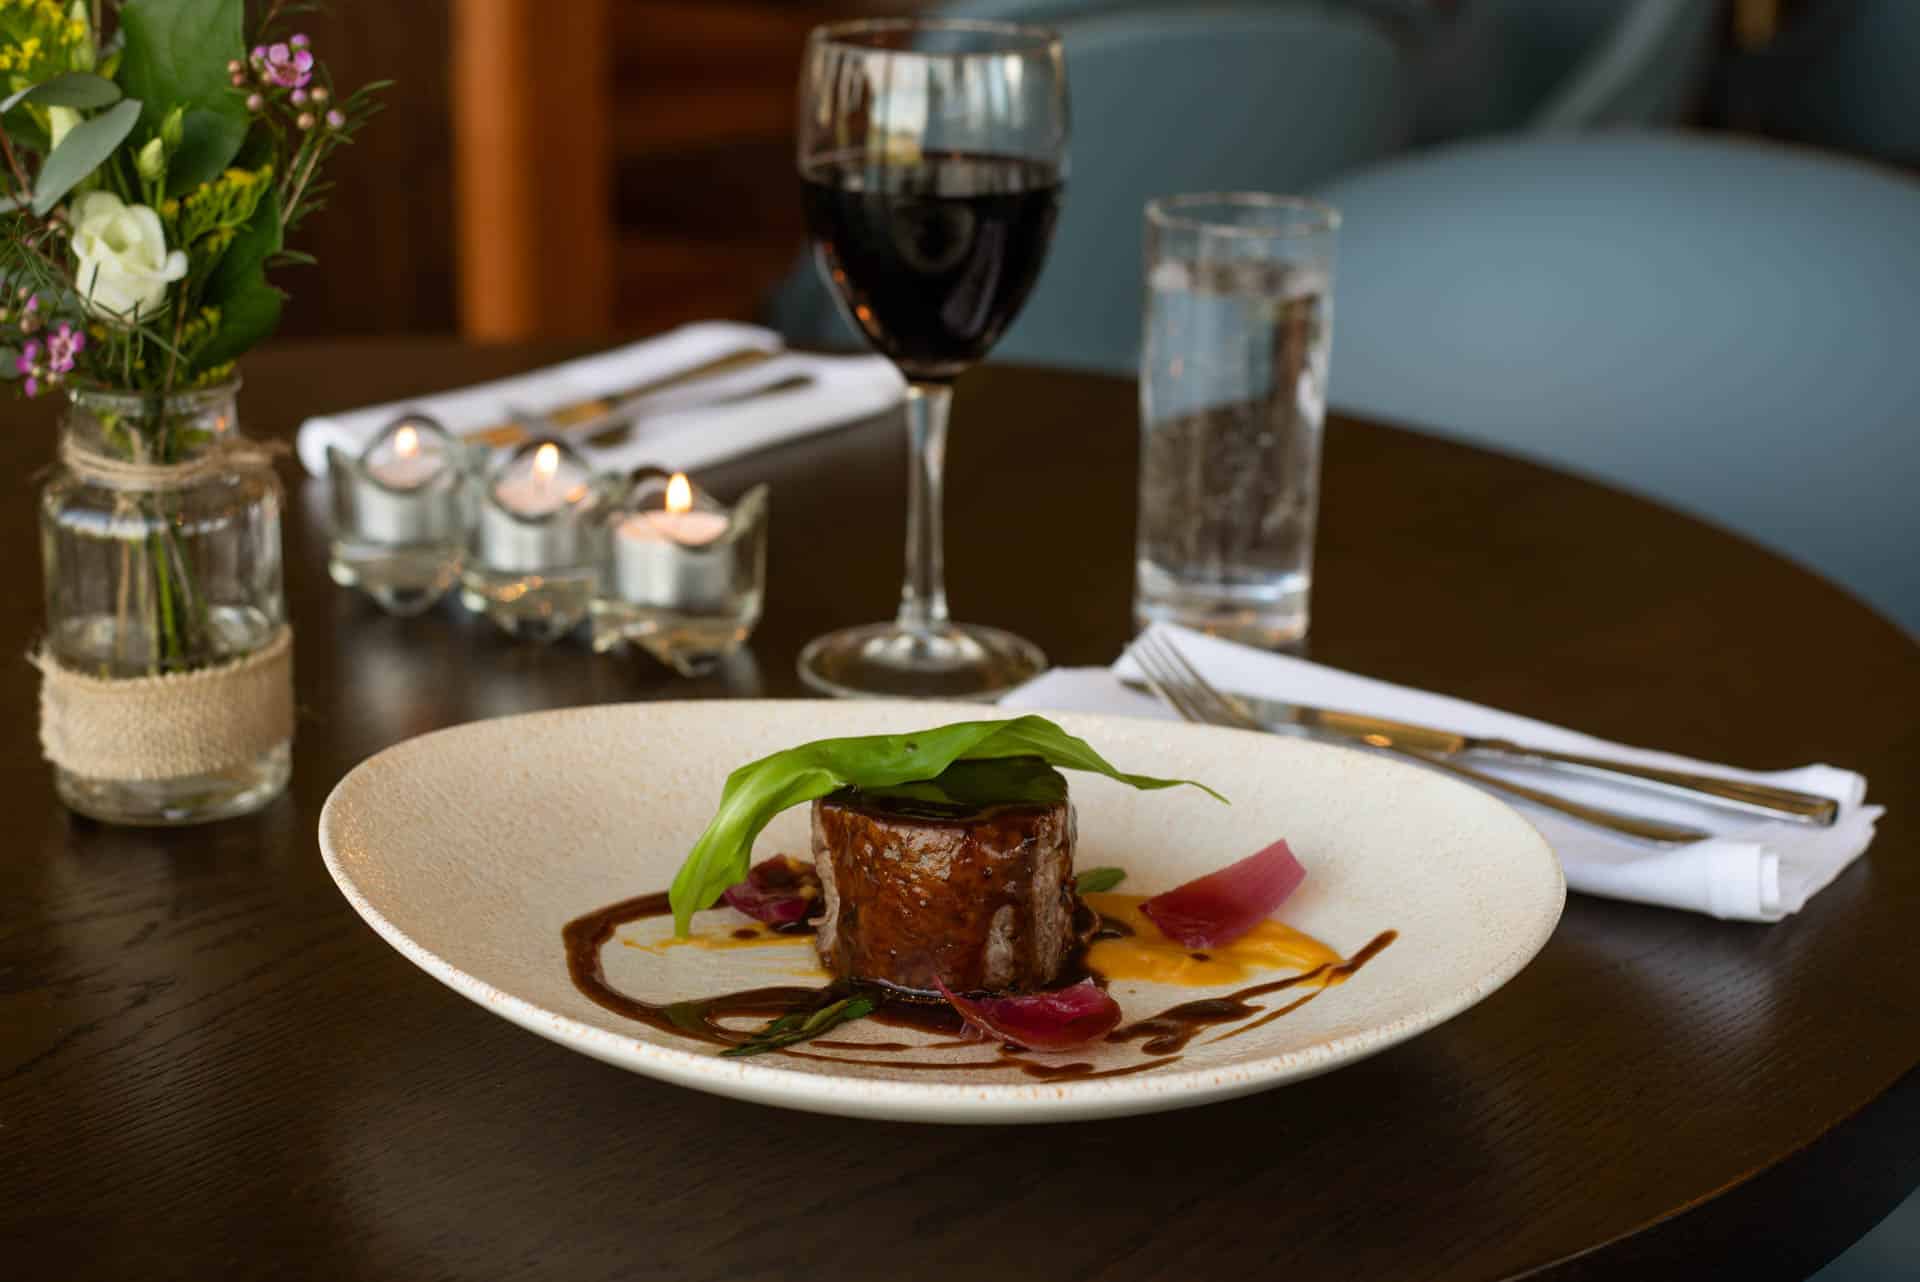 Tulfarris Hotel Featherblade of Irish Beef served with glass of red wine